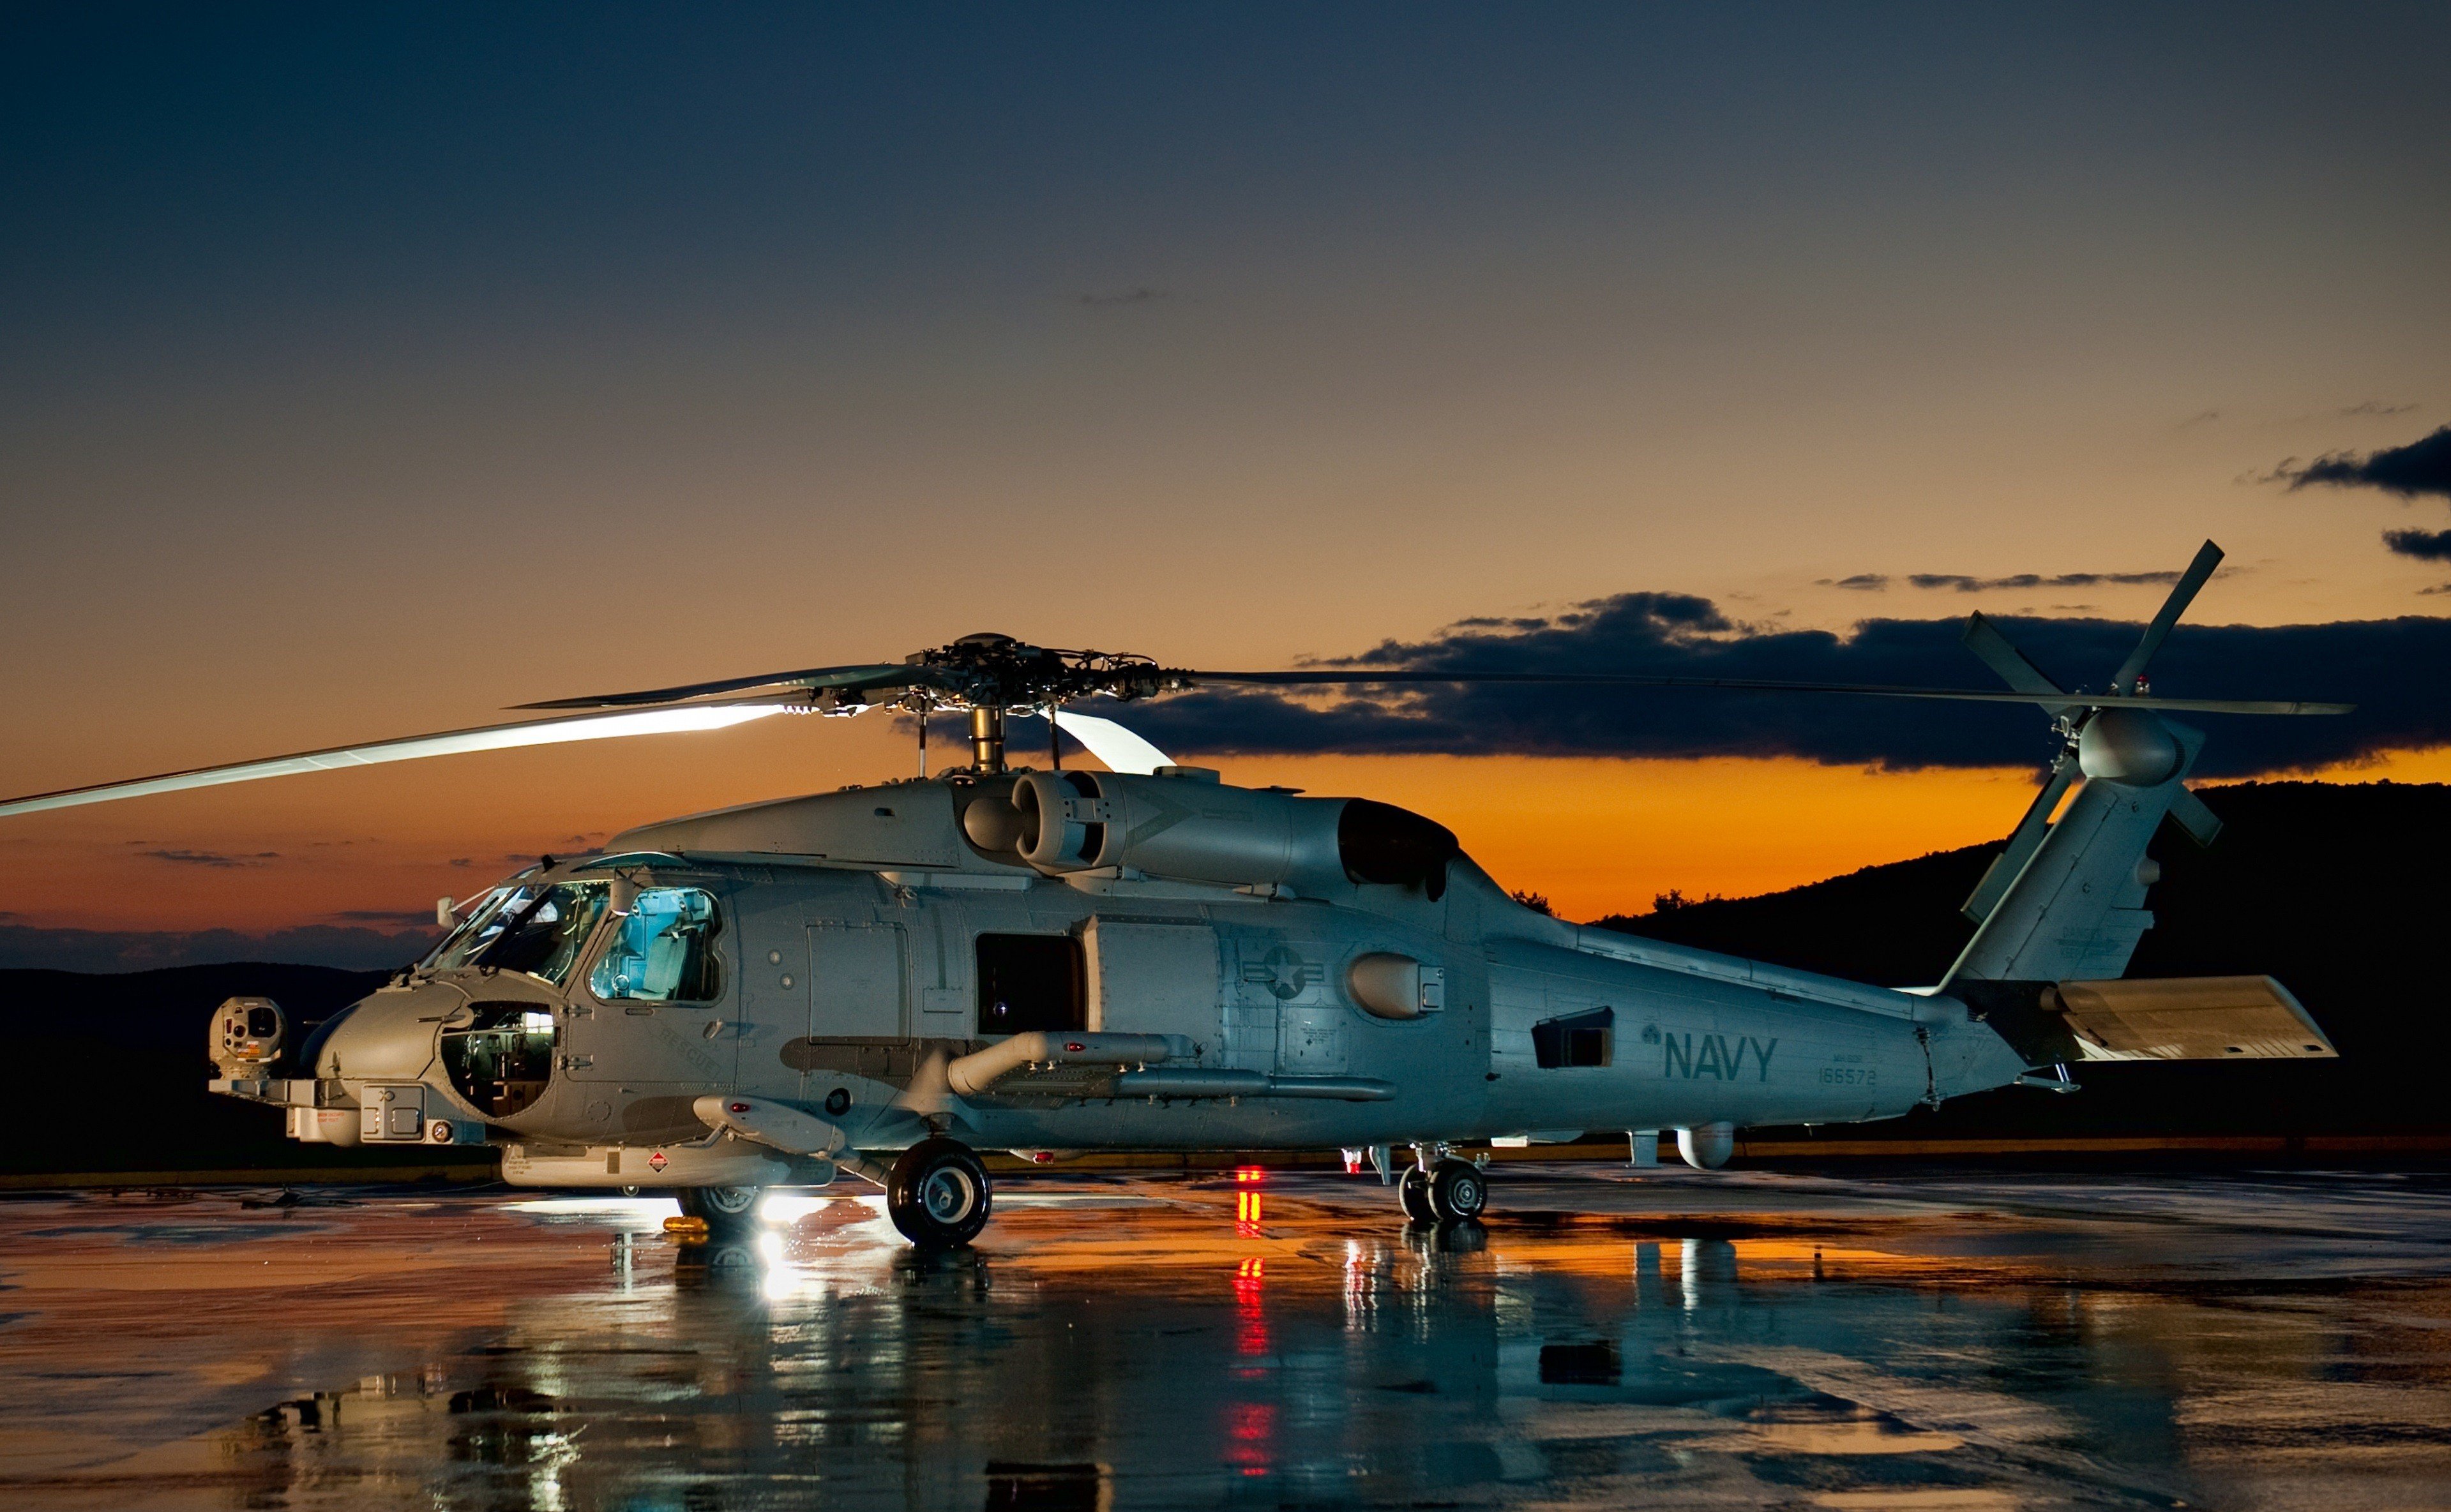 photography, Helicopters, United States Navy, Dusk, Sikorsky UH 60 Black Hawk Wallpaper